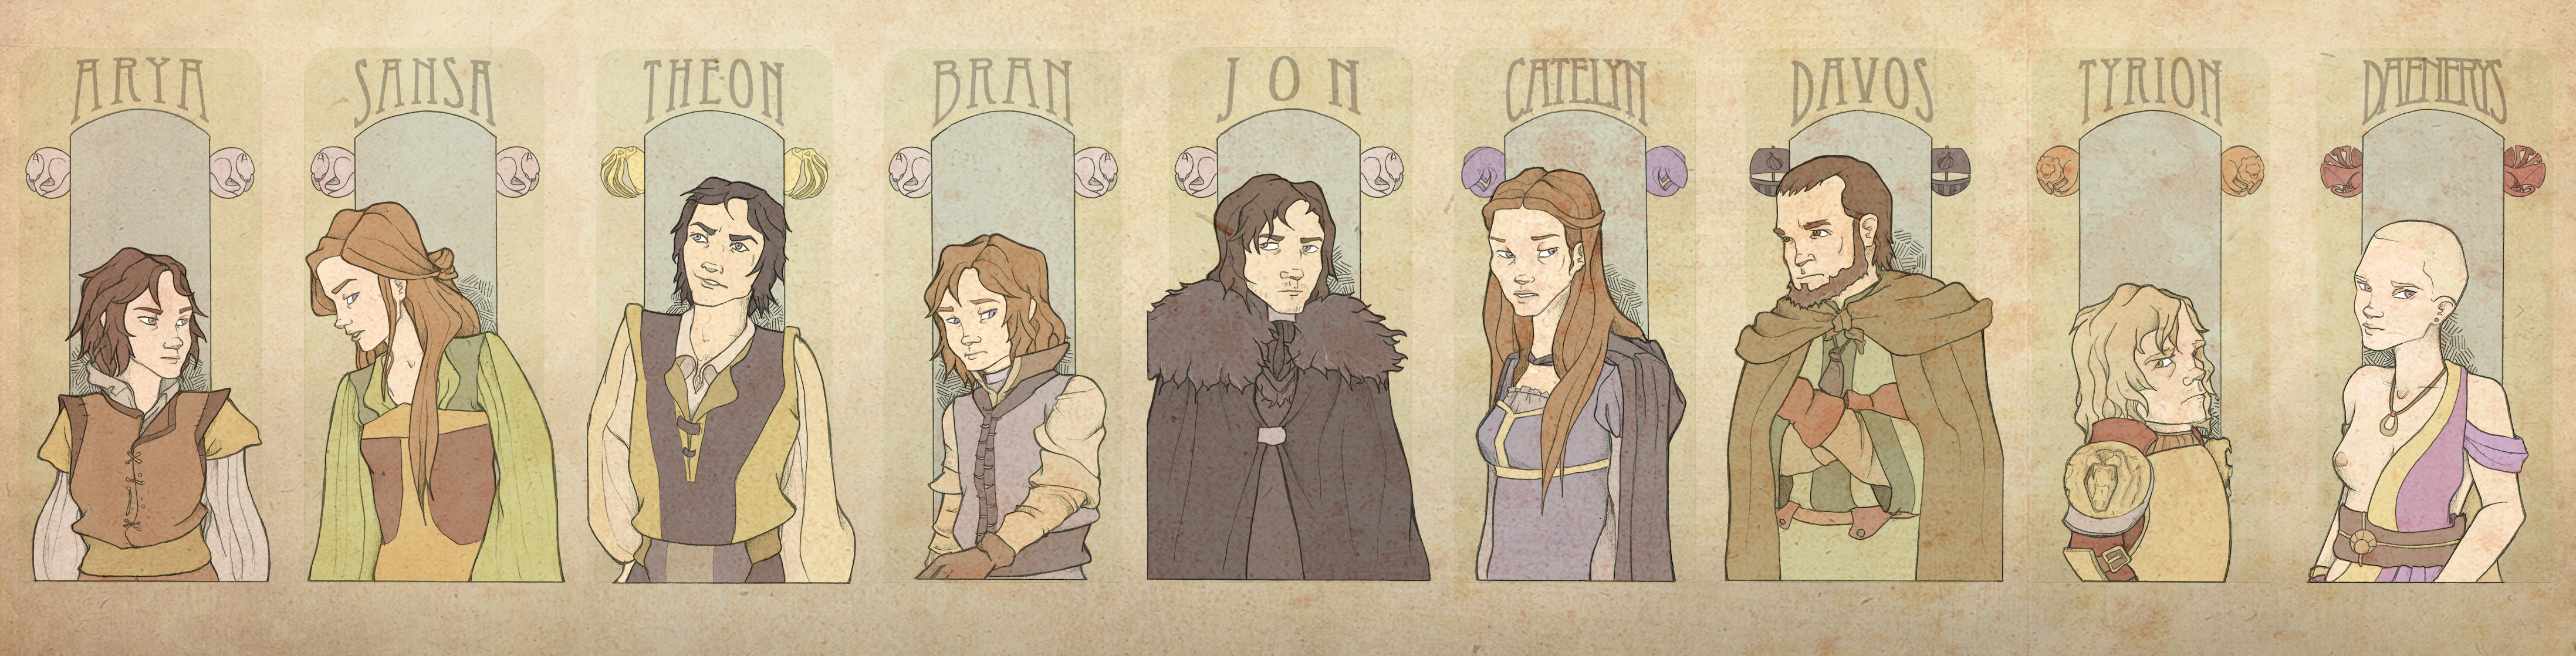 A Clash of Kings by Cry-ky  A clash of kings, Game of thrones art